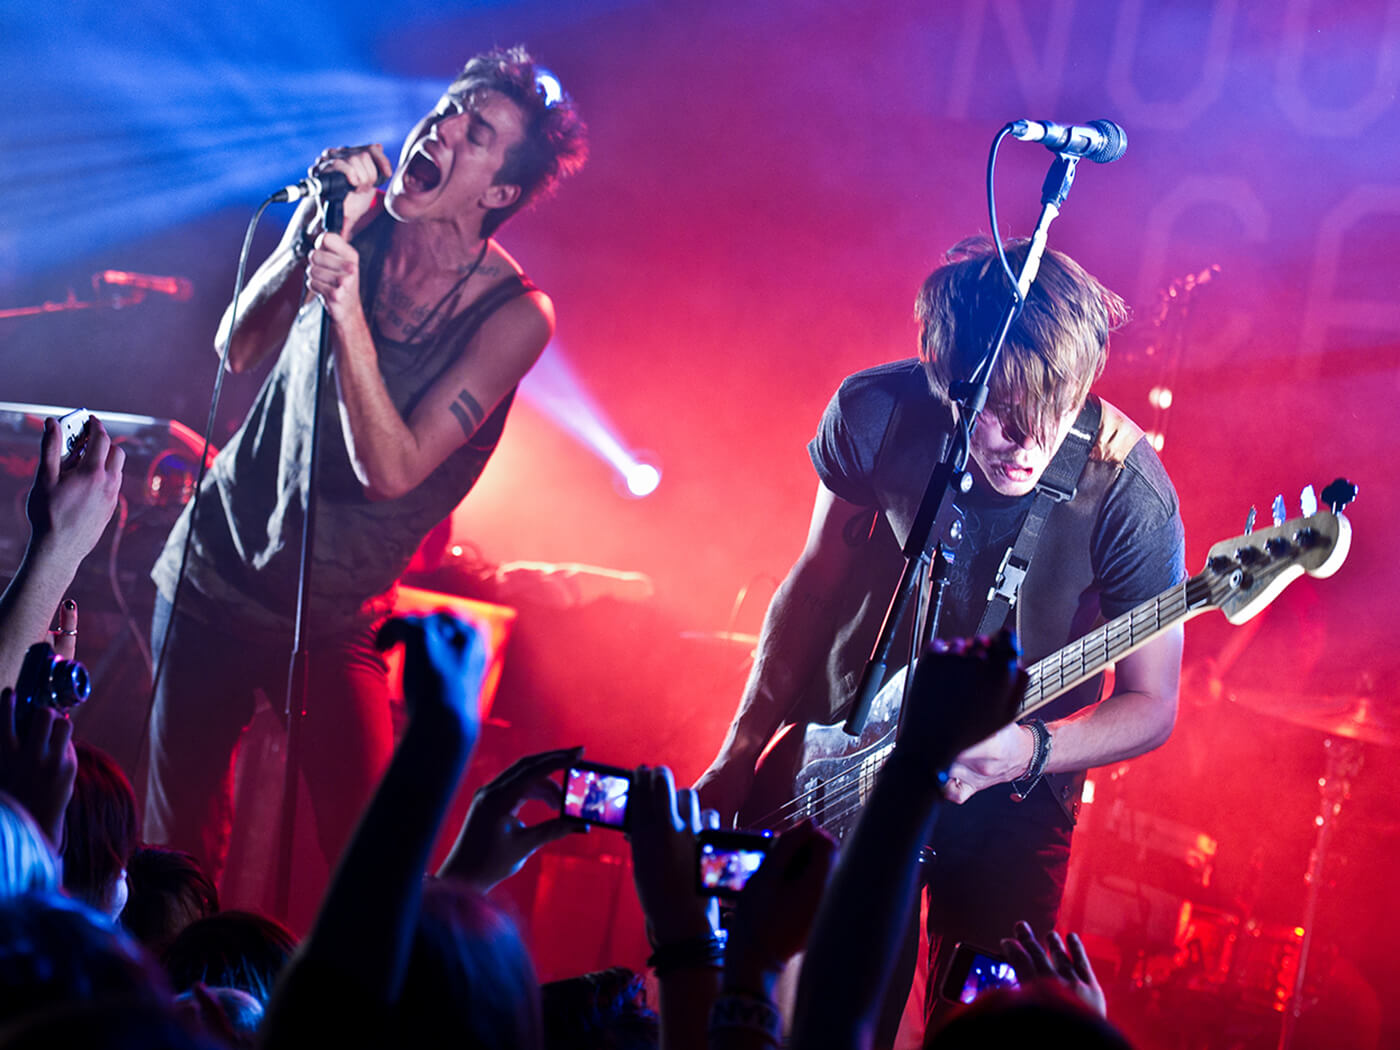 John O’Callaghan and Garrett Nickelsen of The Maine performing in 2011, photo by David Wolff-Patrick/Getty Images